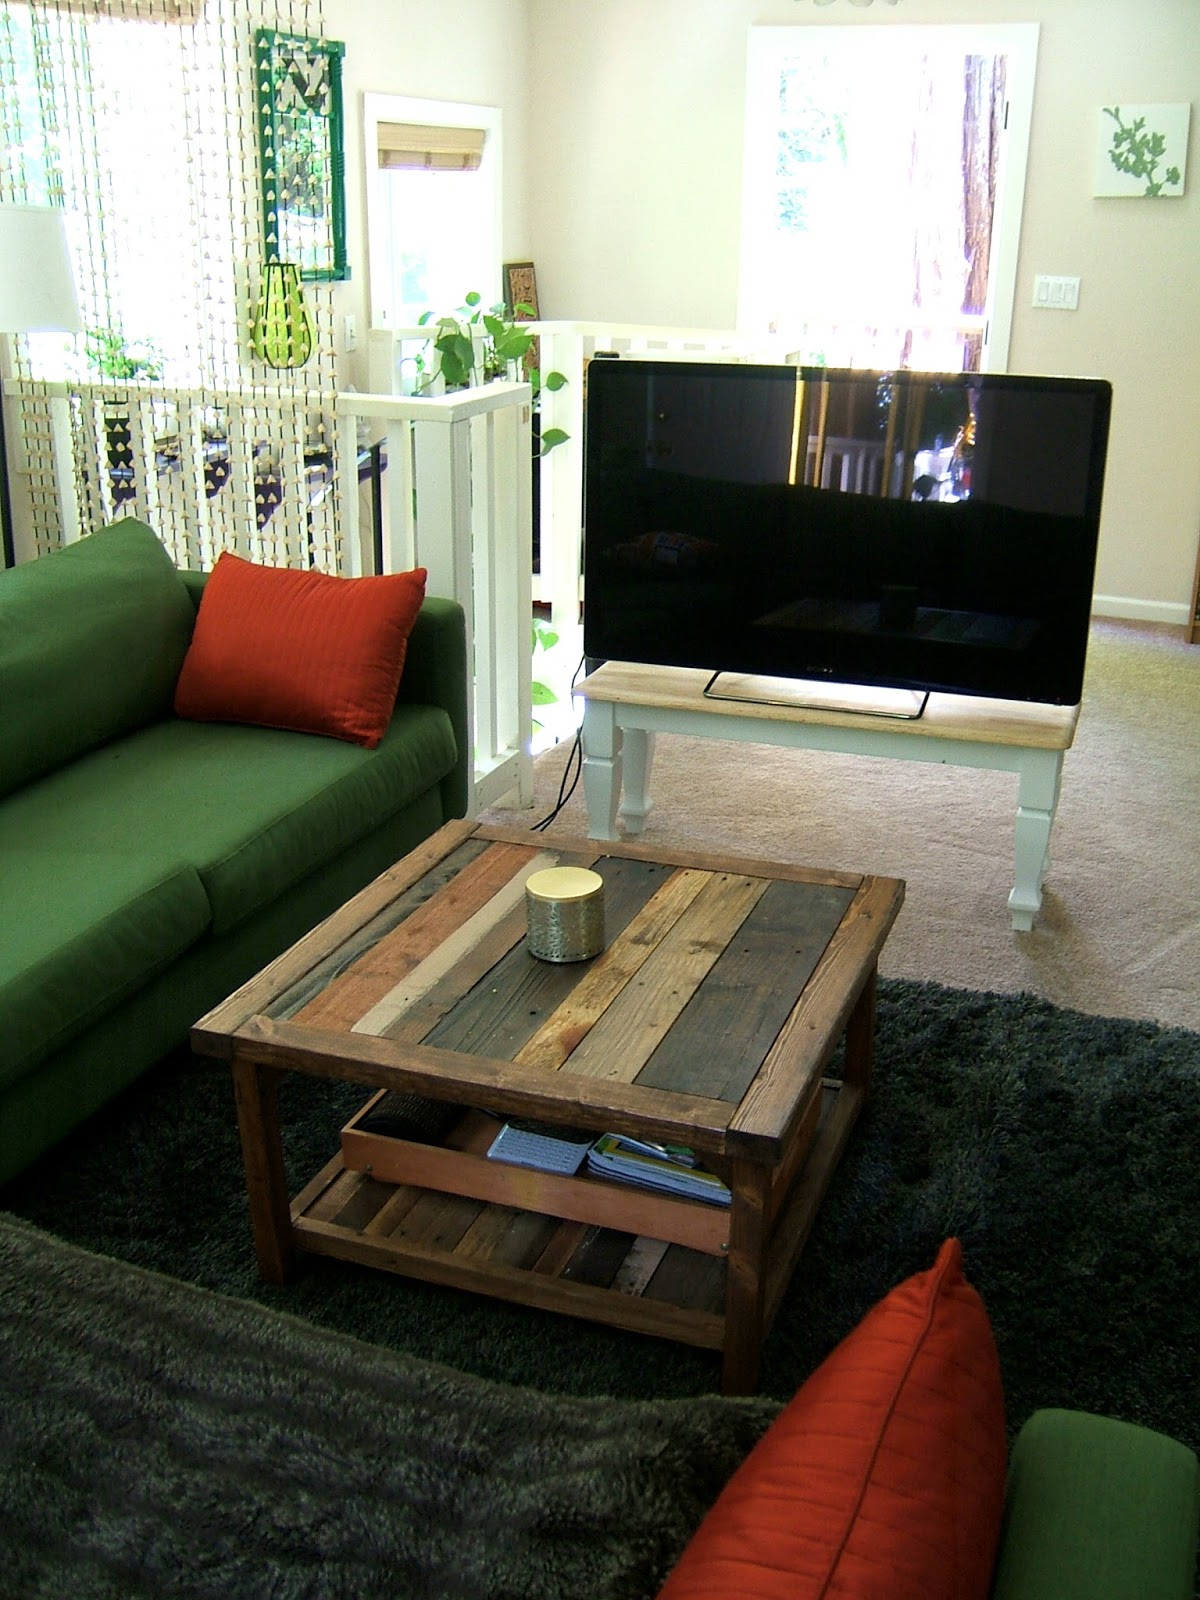 Diy Tv Stand Plans How to: build a tv stand